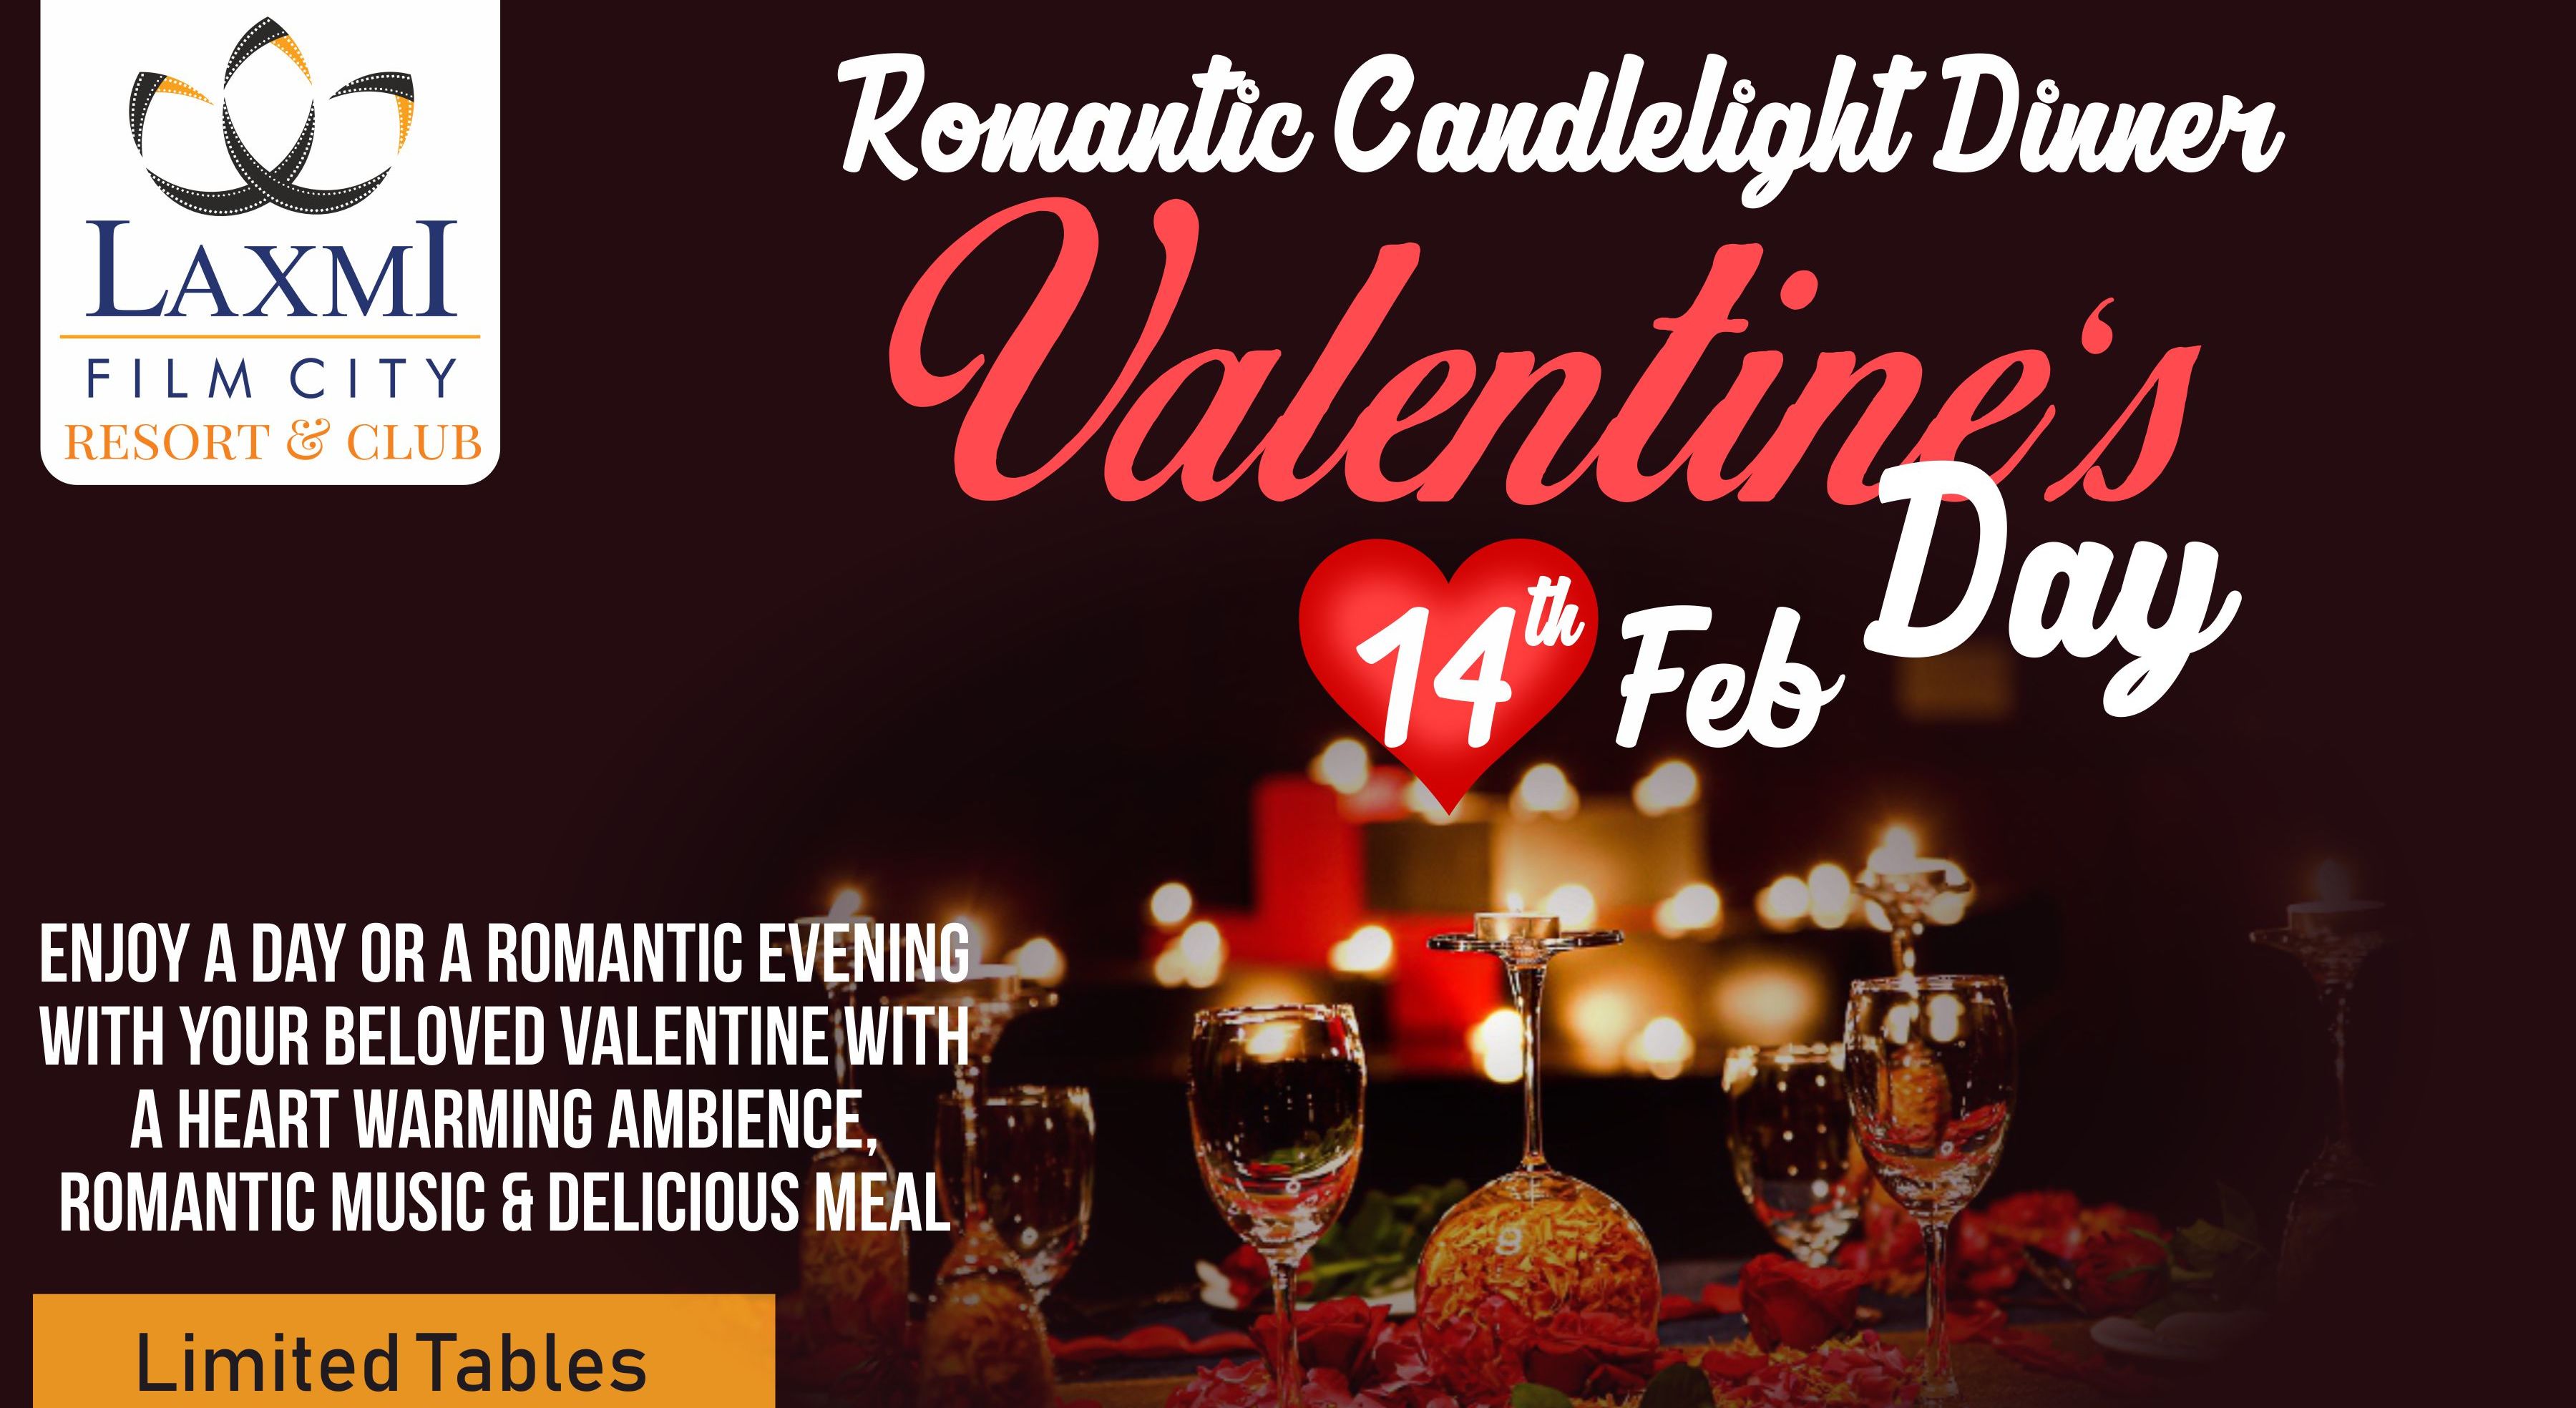 Delhi dinner private candlelight in Best Romantic